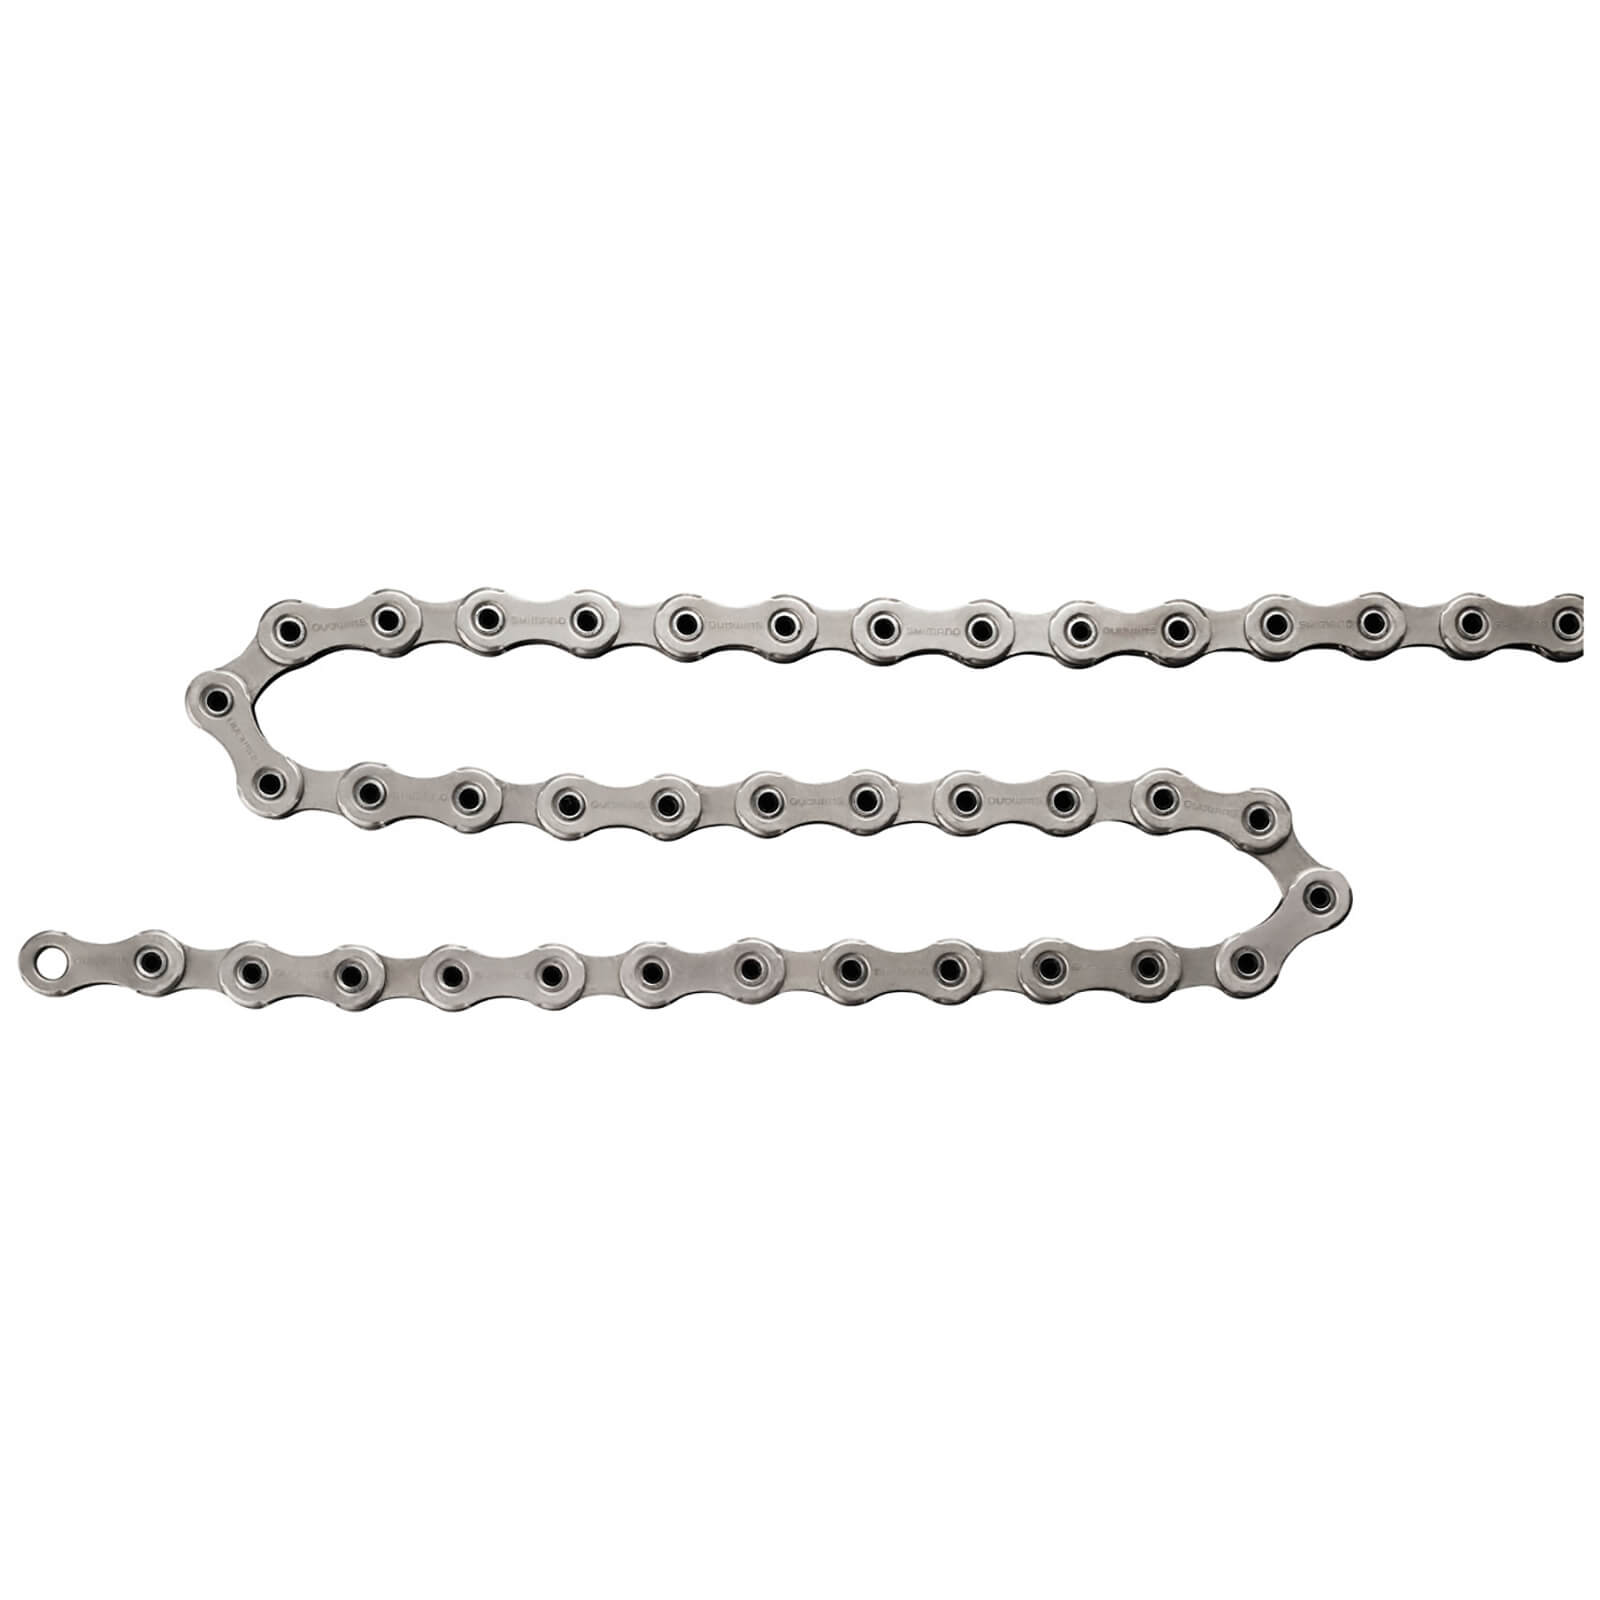 Shimano Dura-Ace R9100 11 Speed Chain